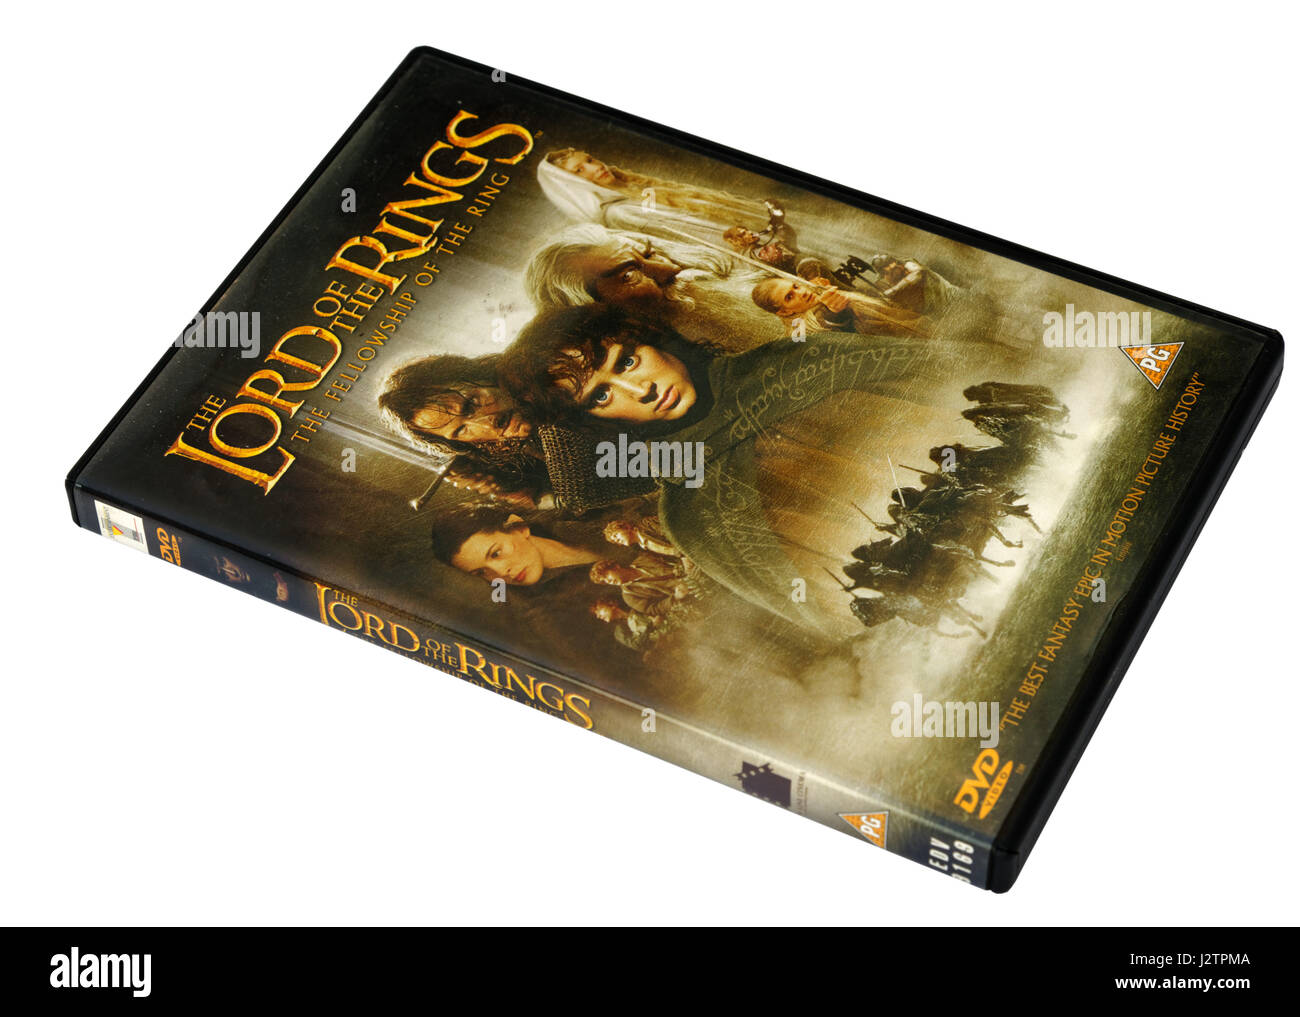 Lord of The Rings DVD 'The Fellowship of the Ring' Stock Photo